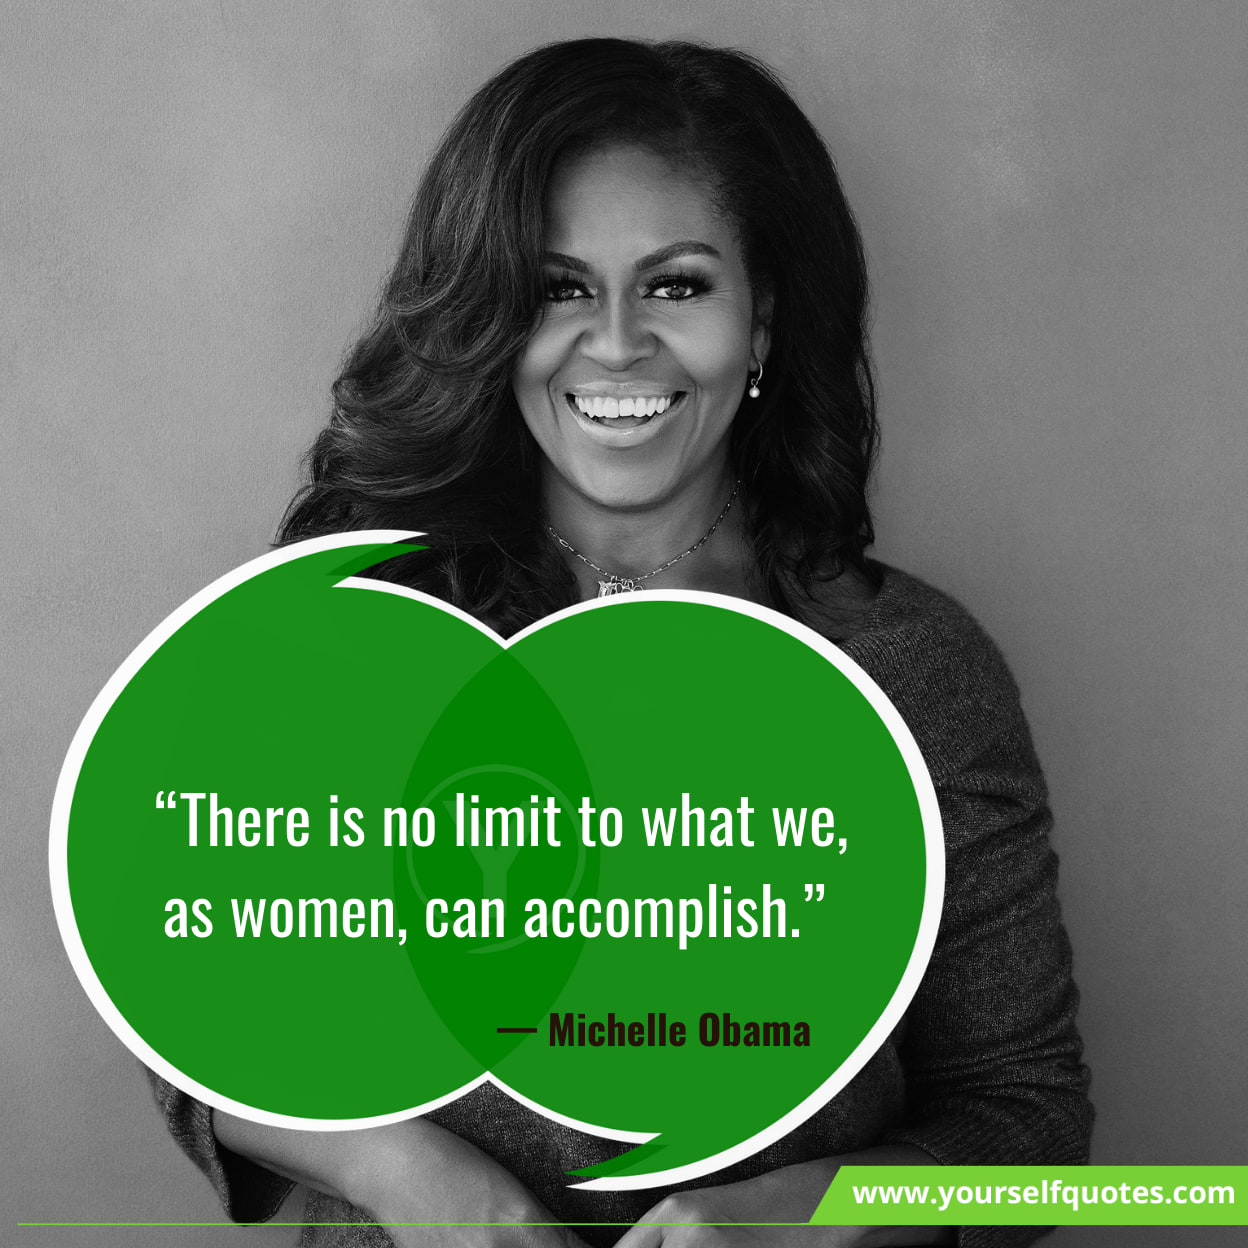 112 Inspirational Quotes For Women Will Inspire To Be Strong